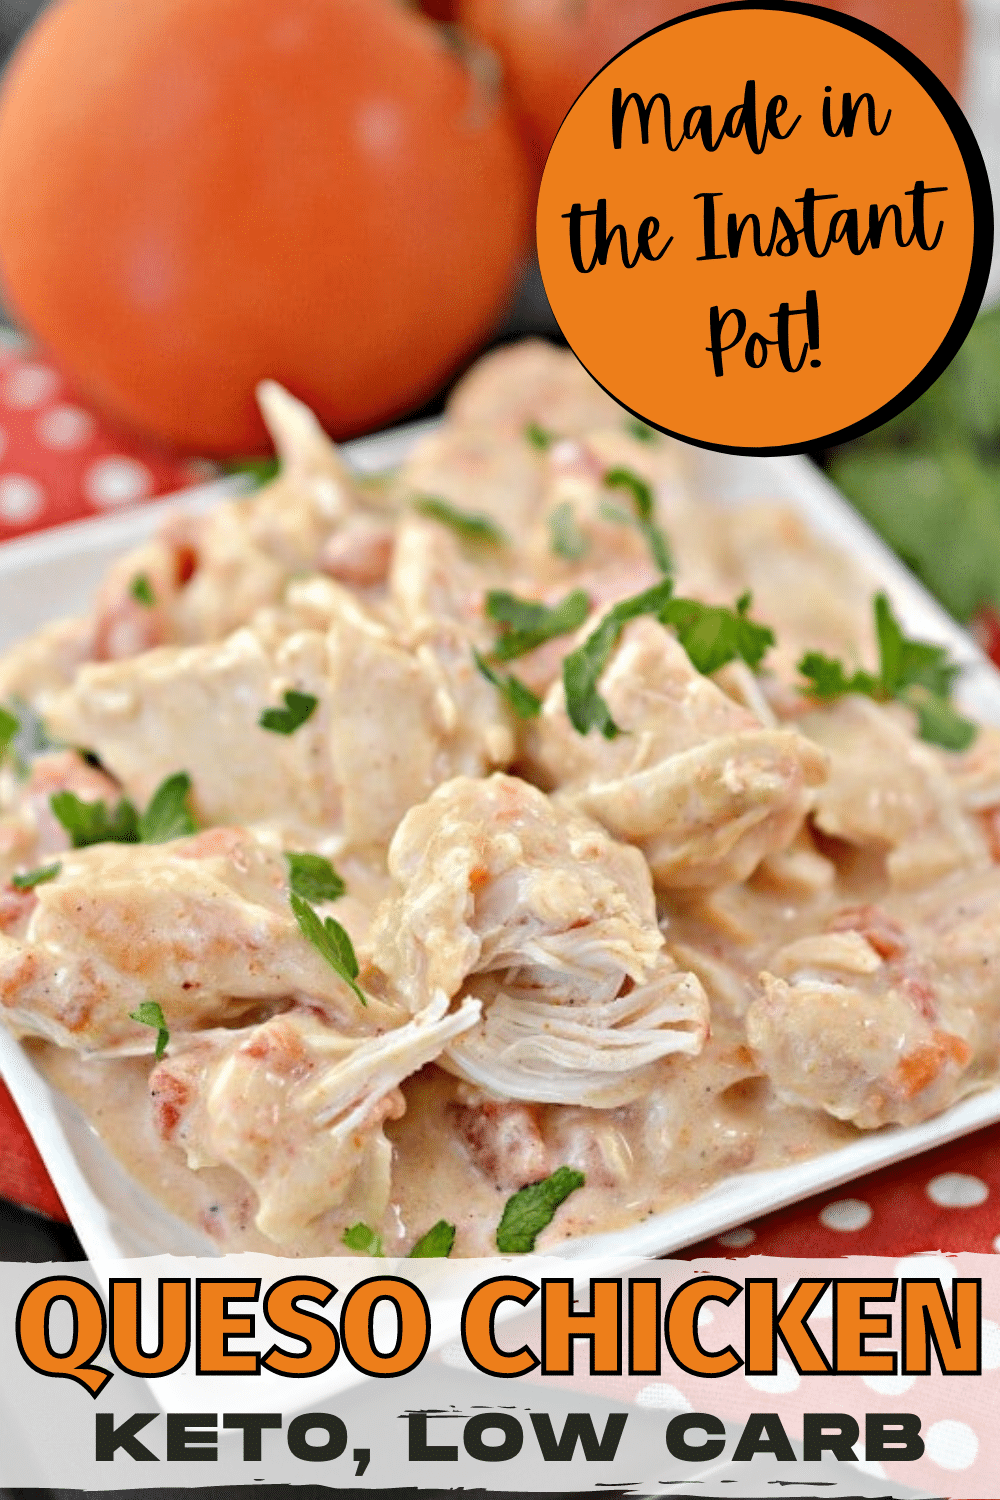 This Instant Pot Queso Chicken is not only easy and delicious, it's perfect for low-carb and keto diets too! #instantpot #chicken #mexican #keto #lowcarb via @wondermomwannab